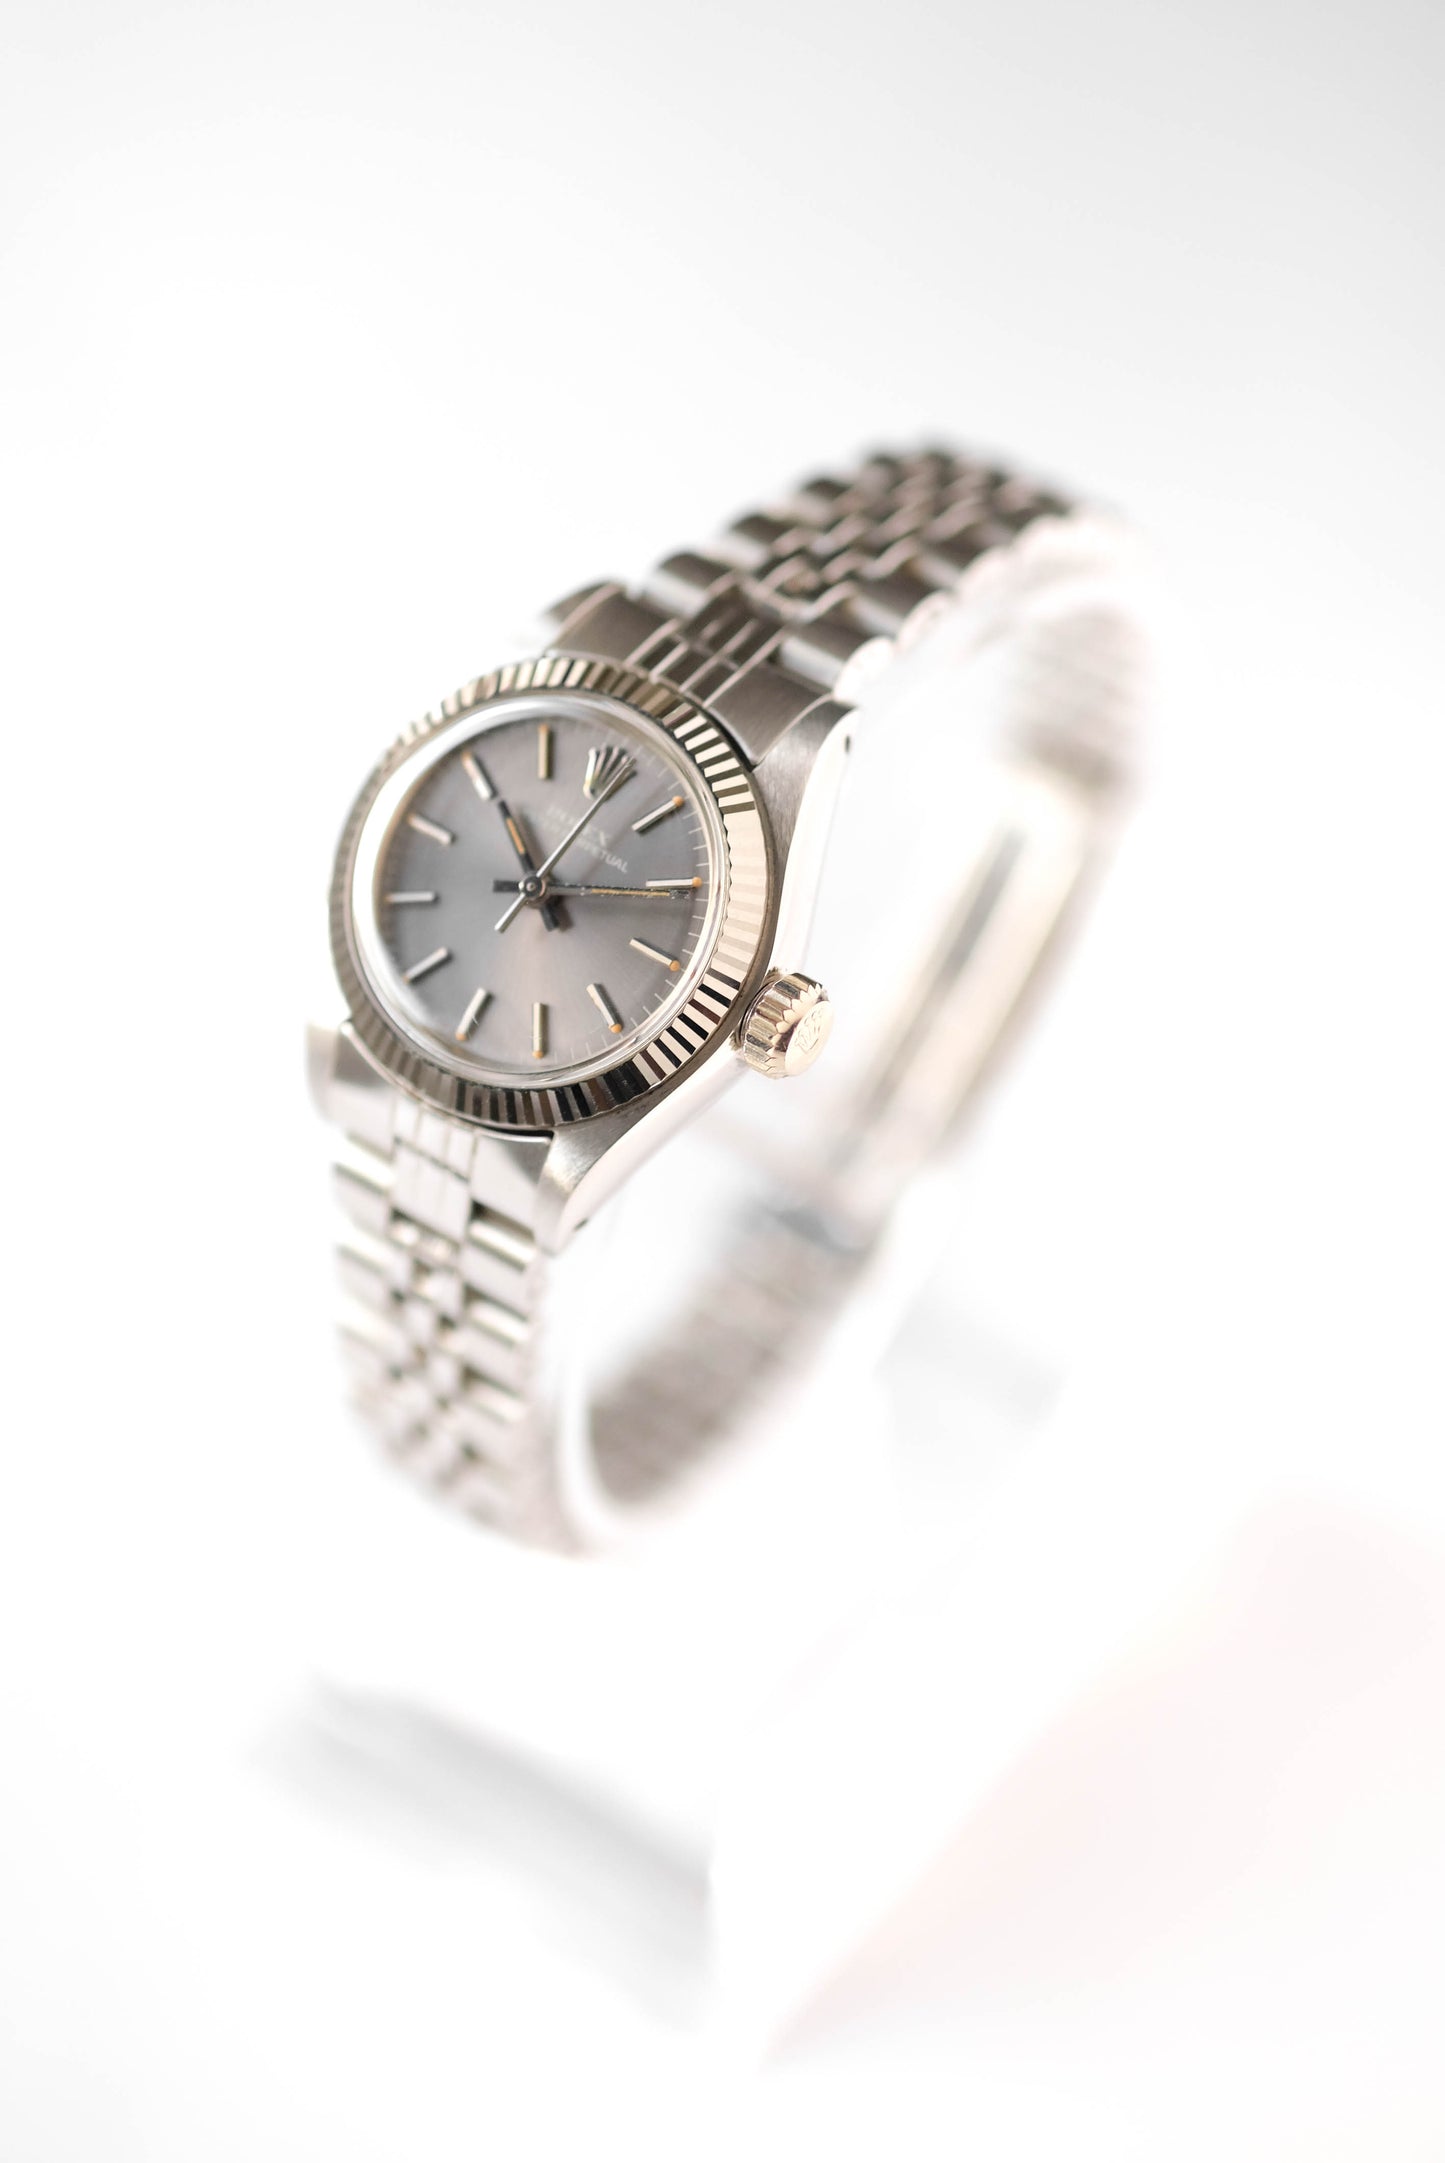 Rolex Oyster Perpetual Lady Ref. 6719 - 1974